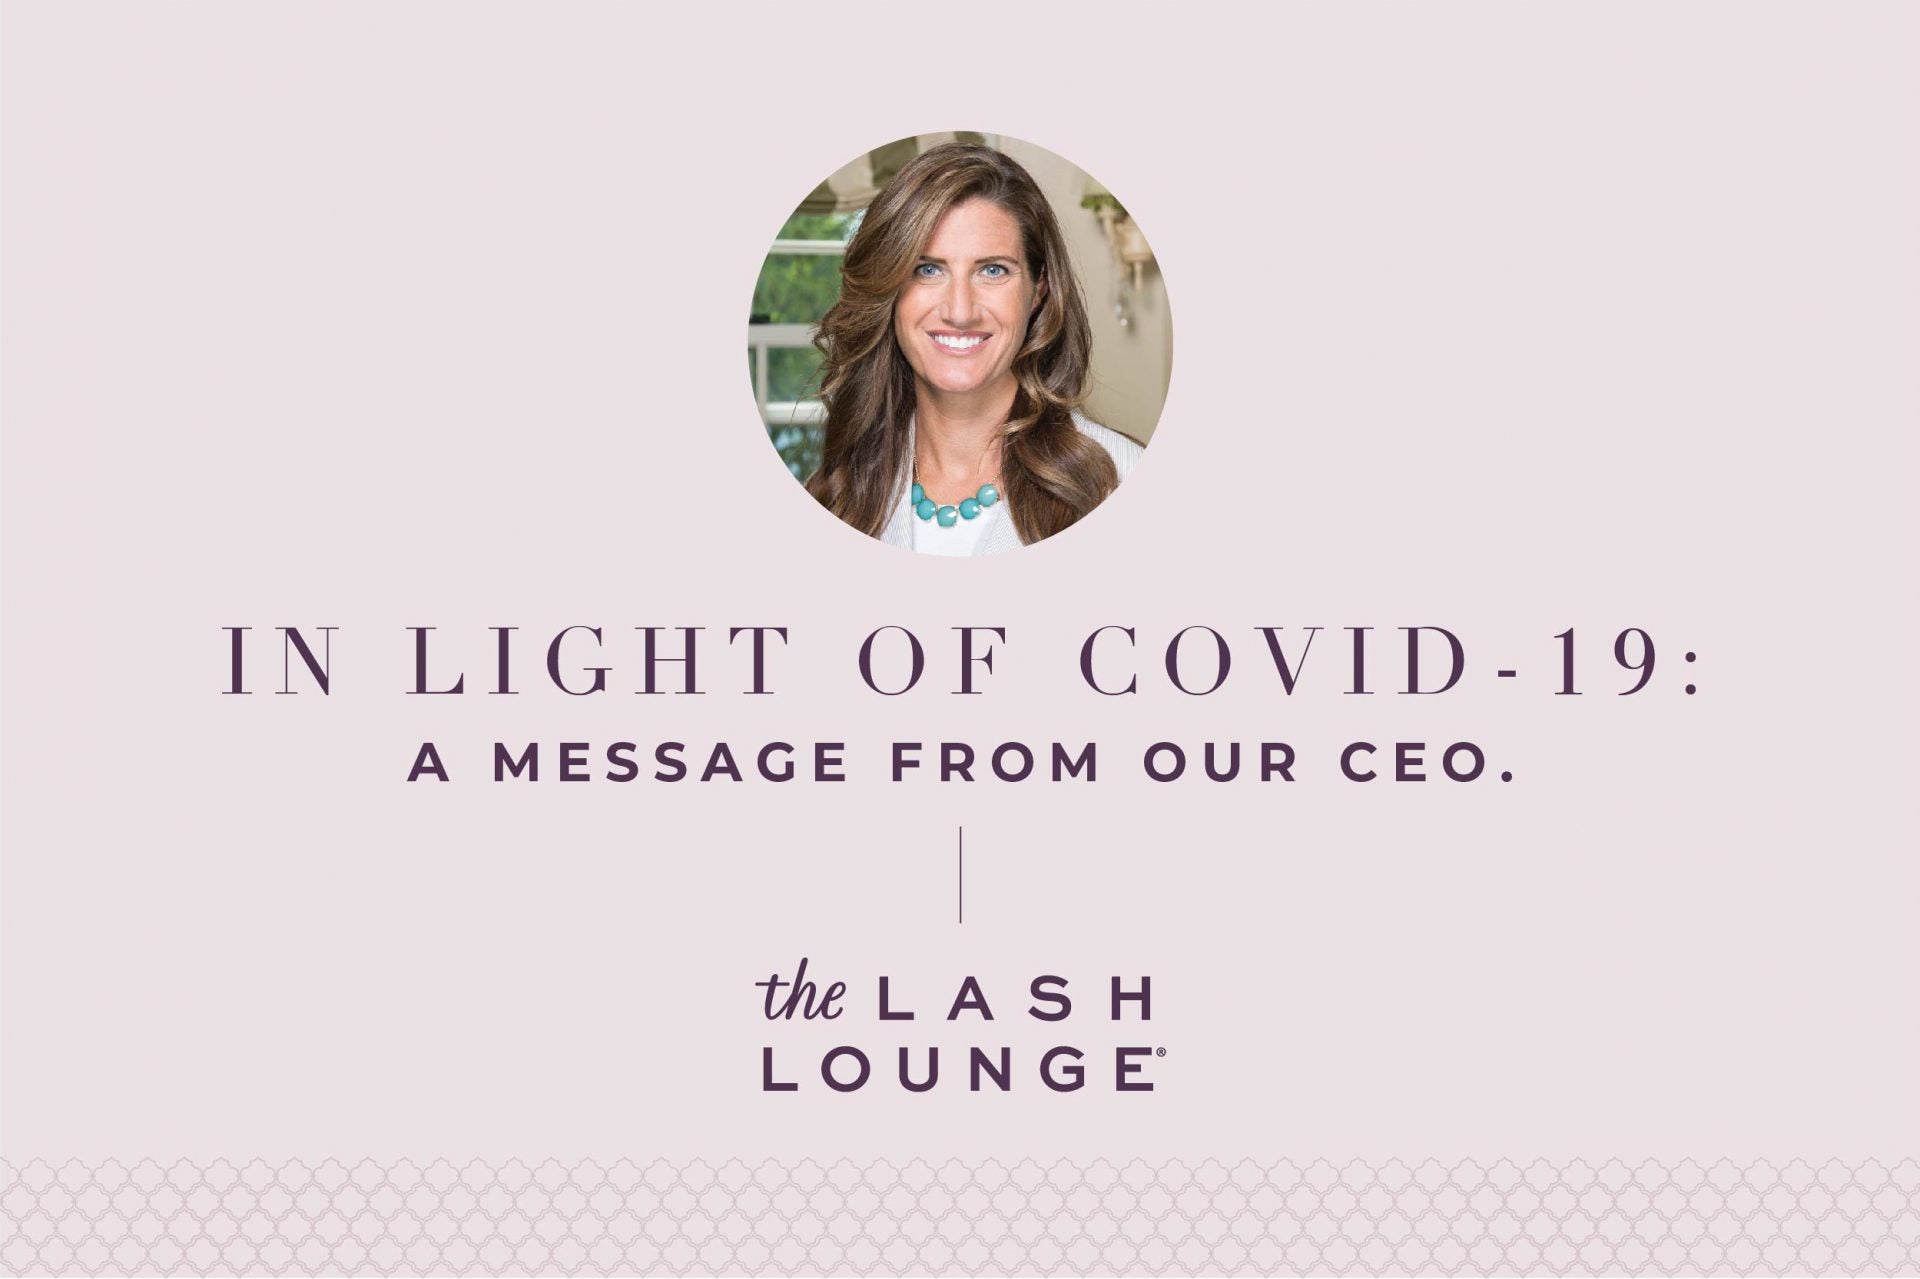 Covid Update from CEO of The Lash Lounge